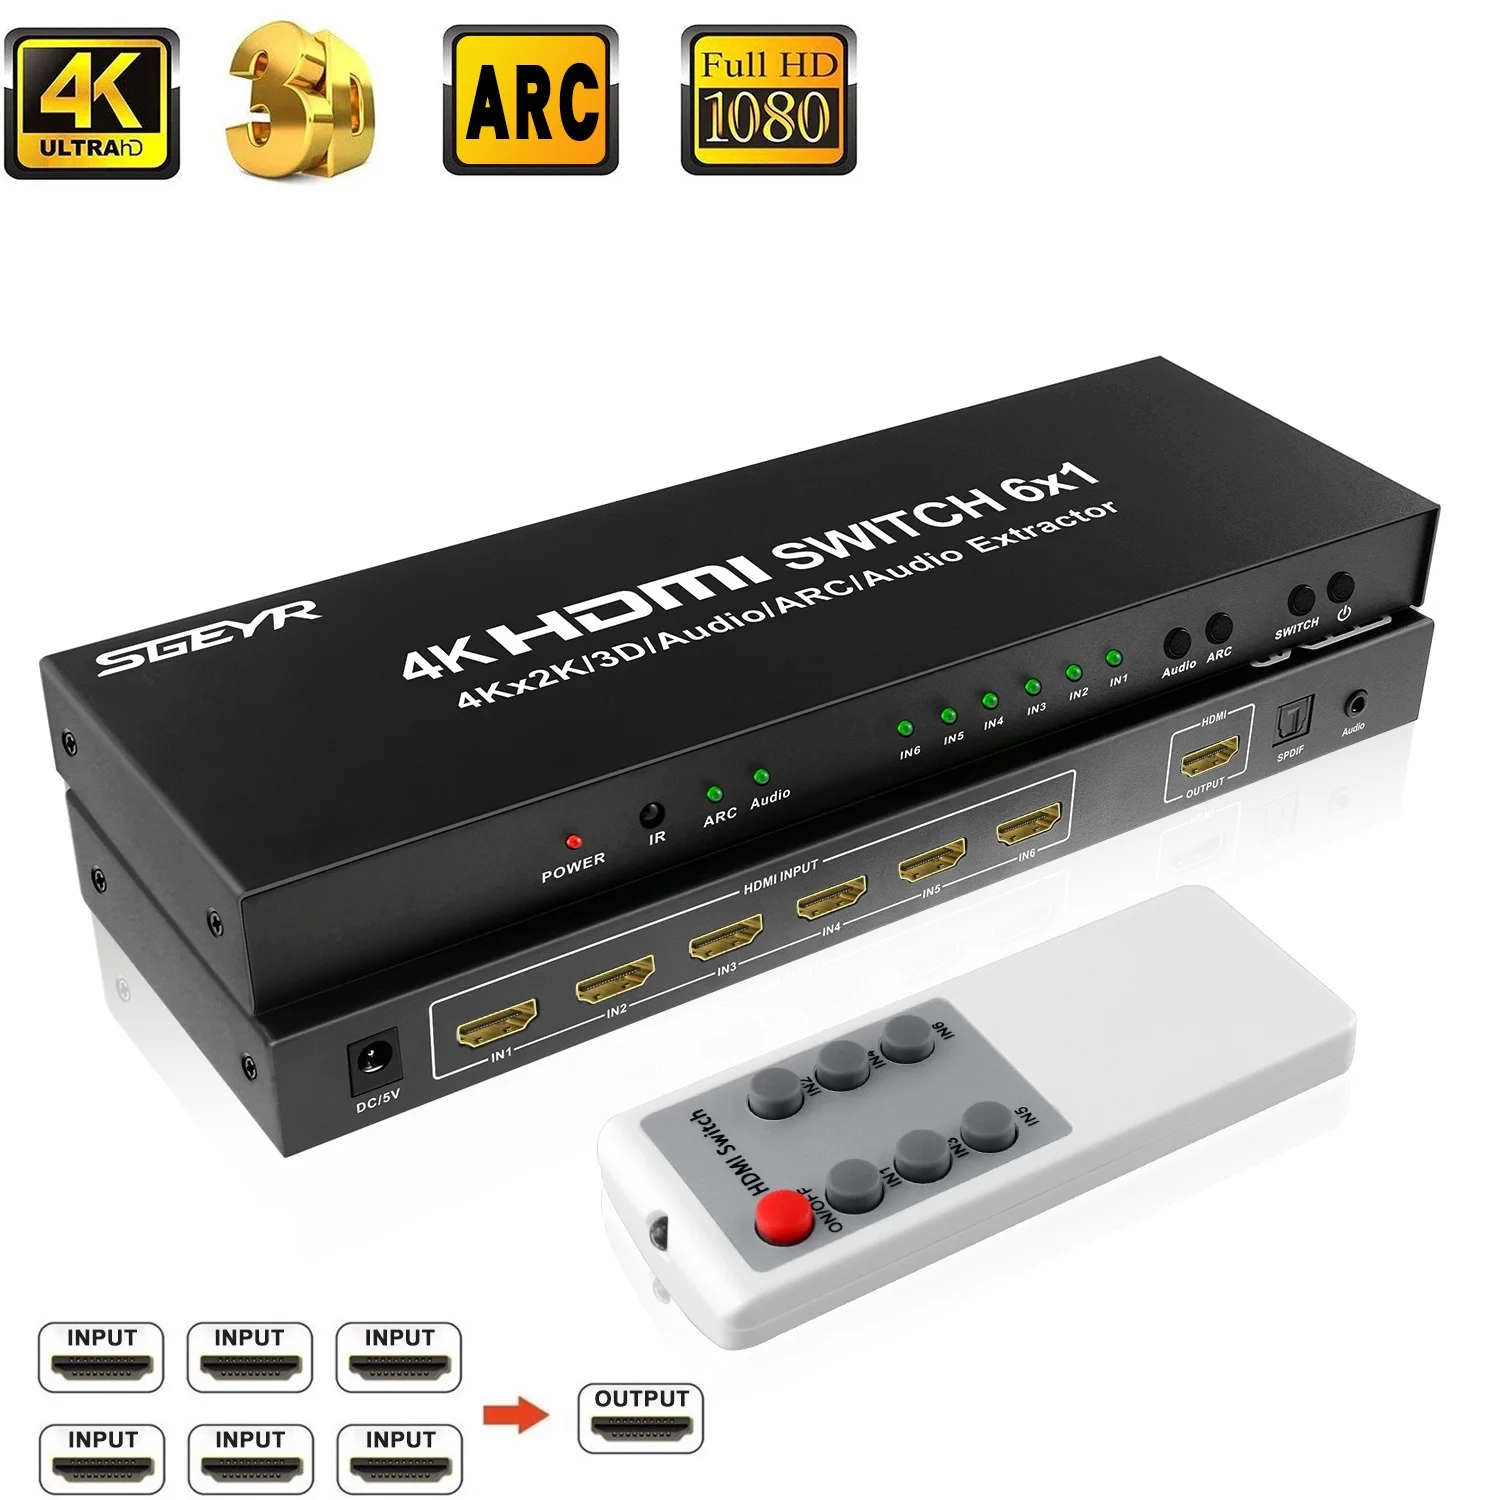 6x1 HDMI Switch 4K 6 Port HDMI Switcher 6 In 1 Out with HDMI Audio Extractor IR Remote SPDIF 3.5mm Audio Output Support 4K@30Hz